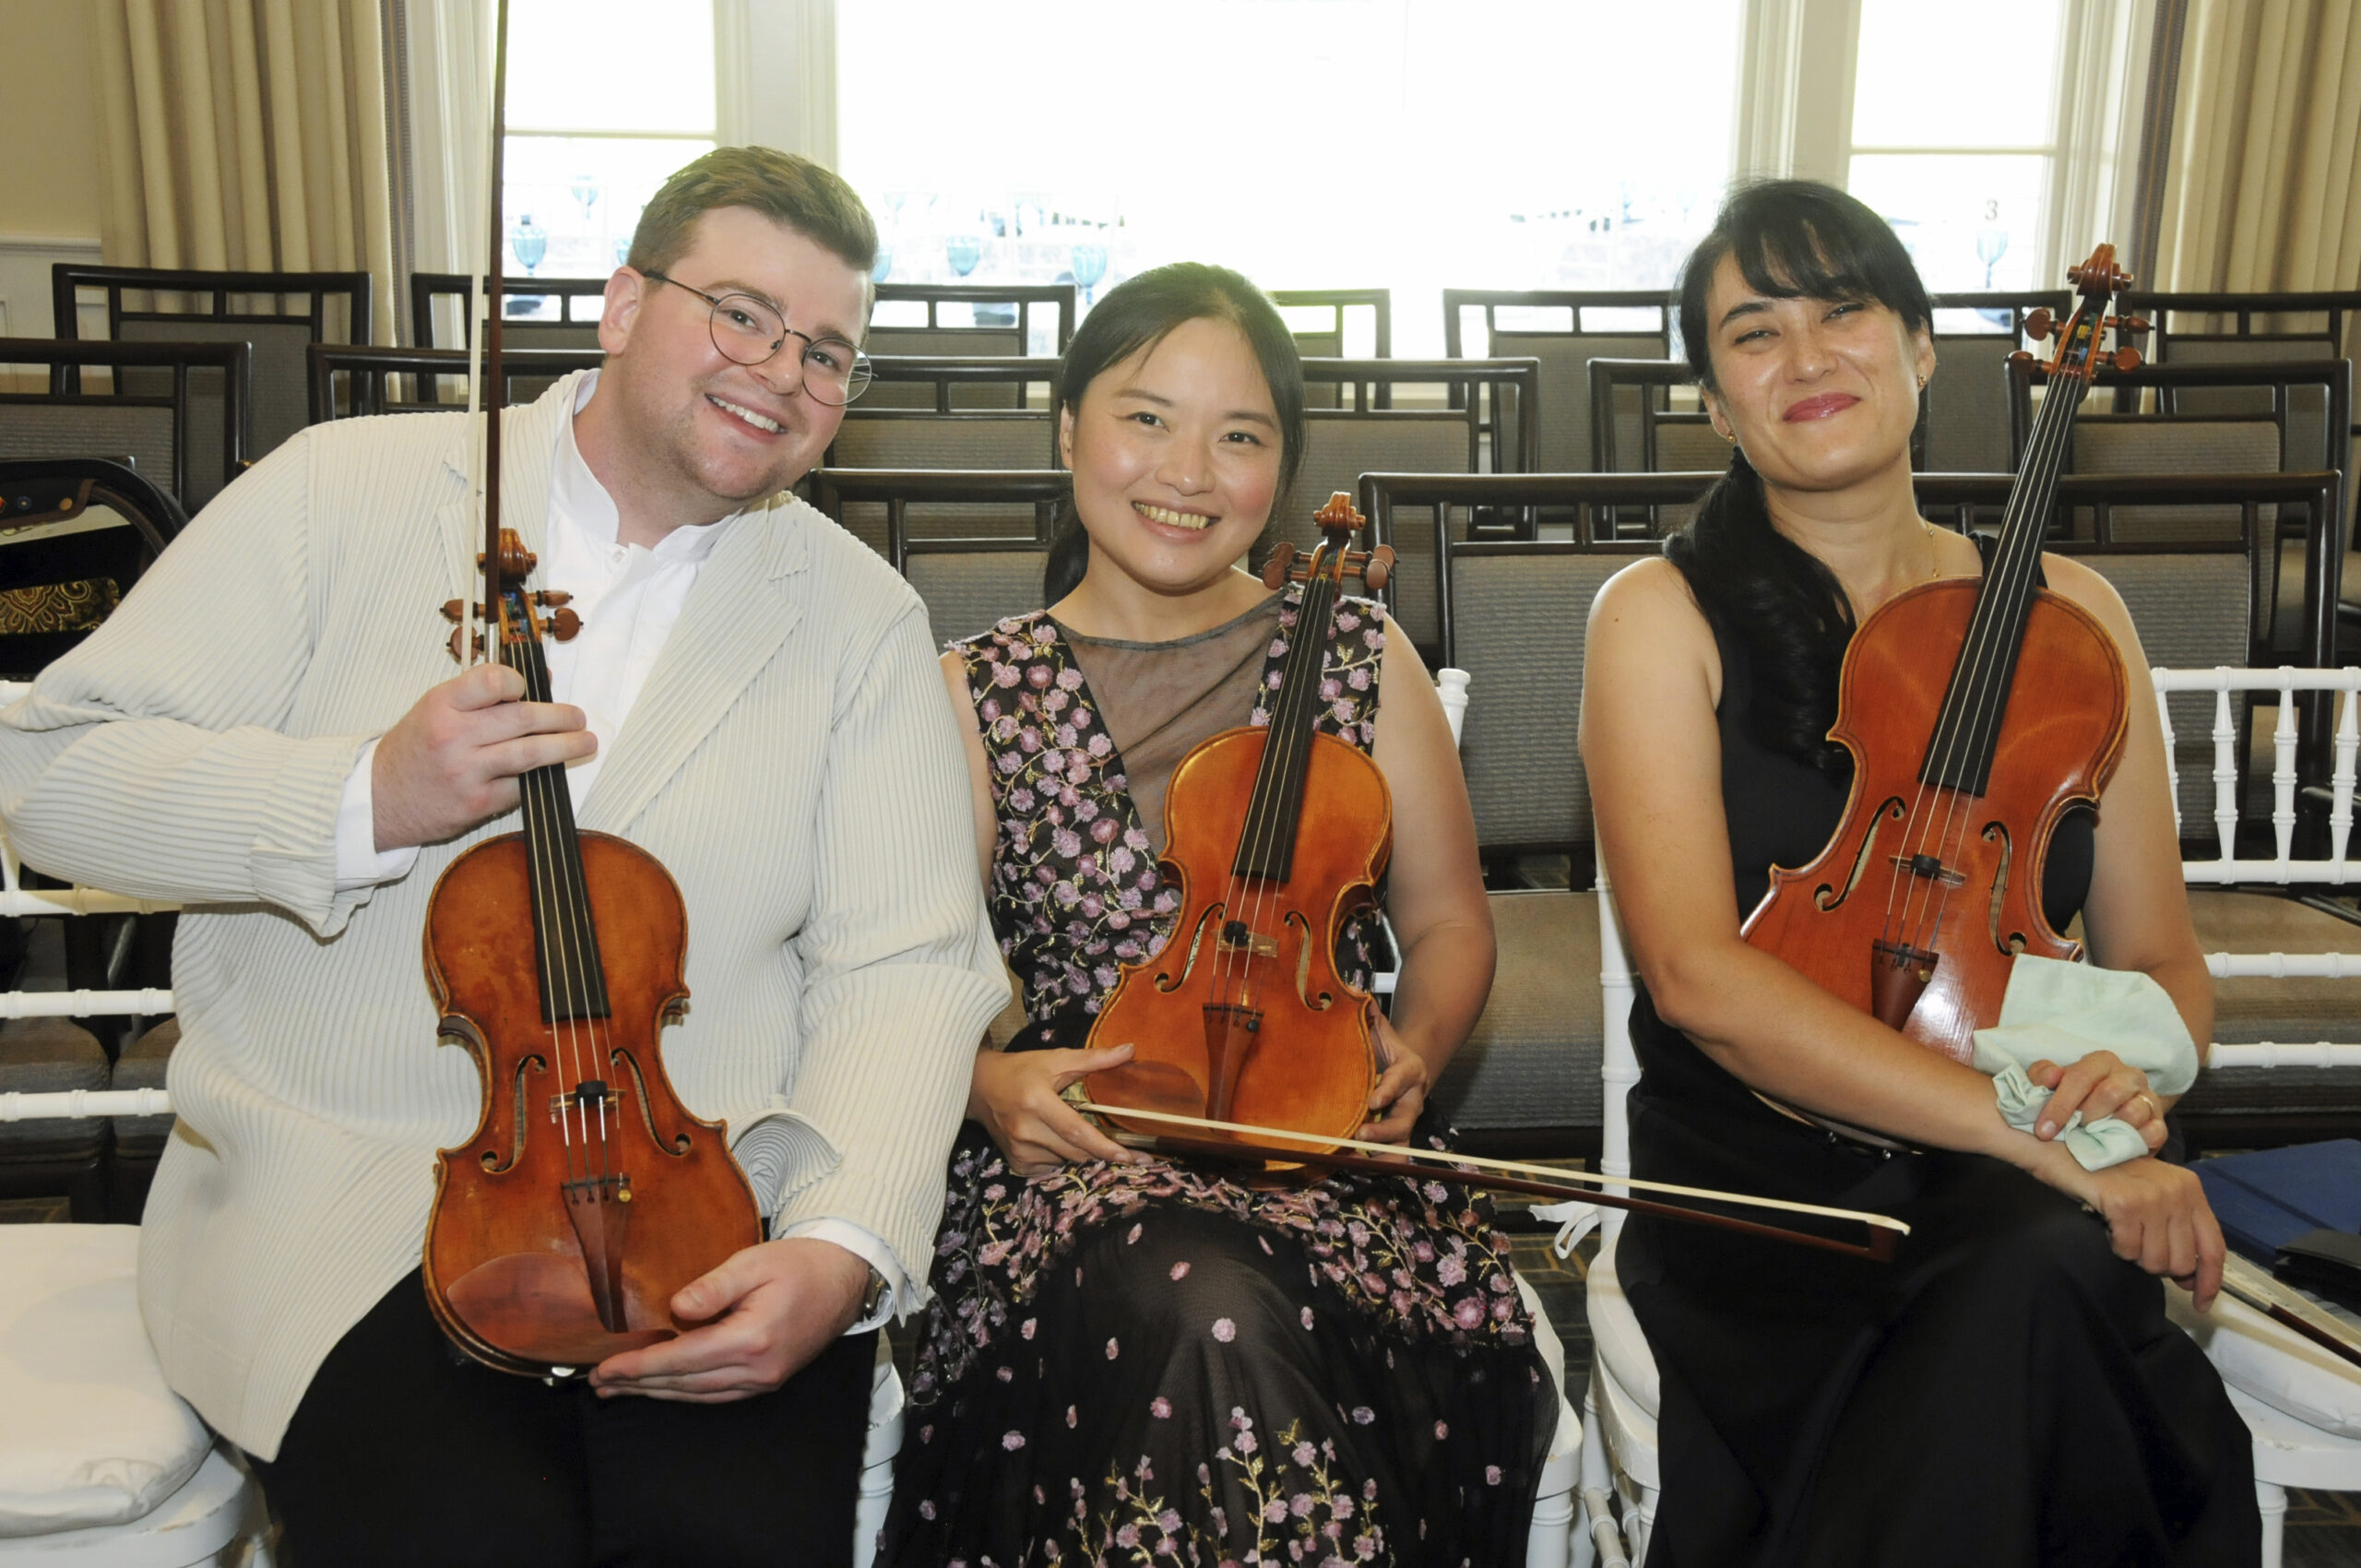 Chad Hoopes, Tien-Hsin Cindy Wu and Melissa Reardon at the Bridgehampton Chamber Music Festival's annual benefit concert, 